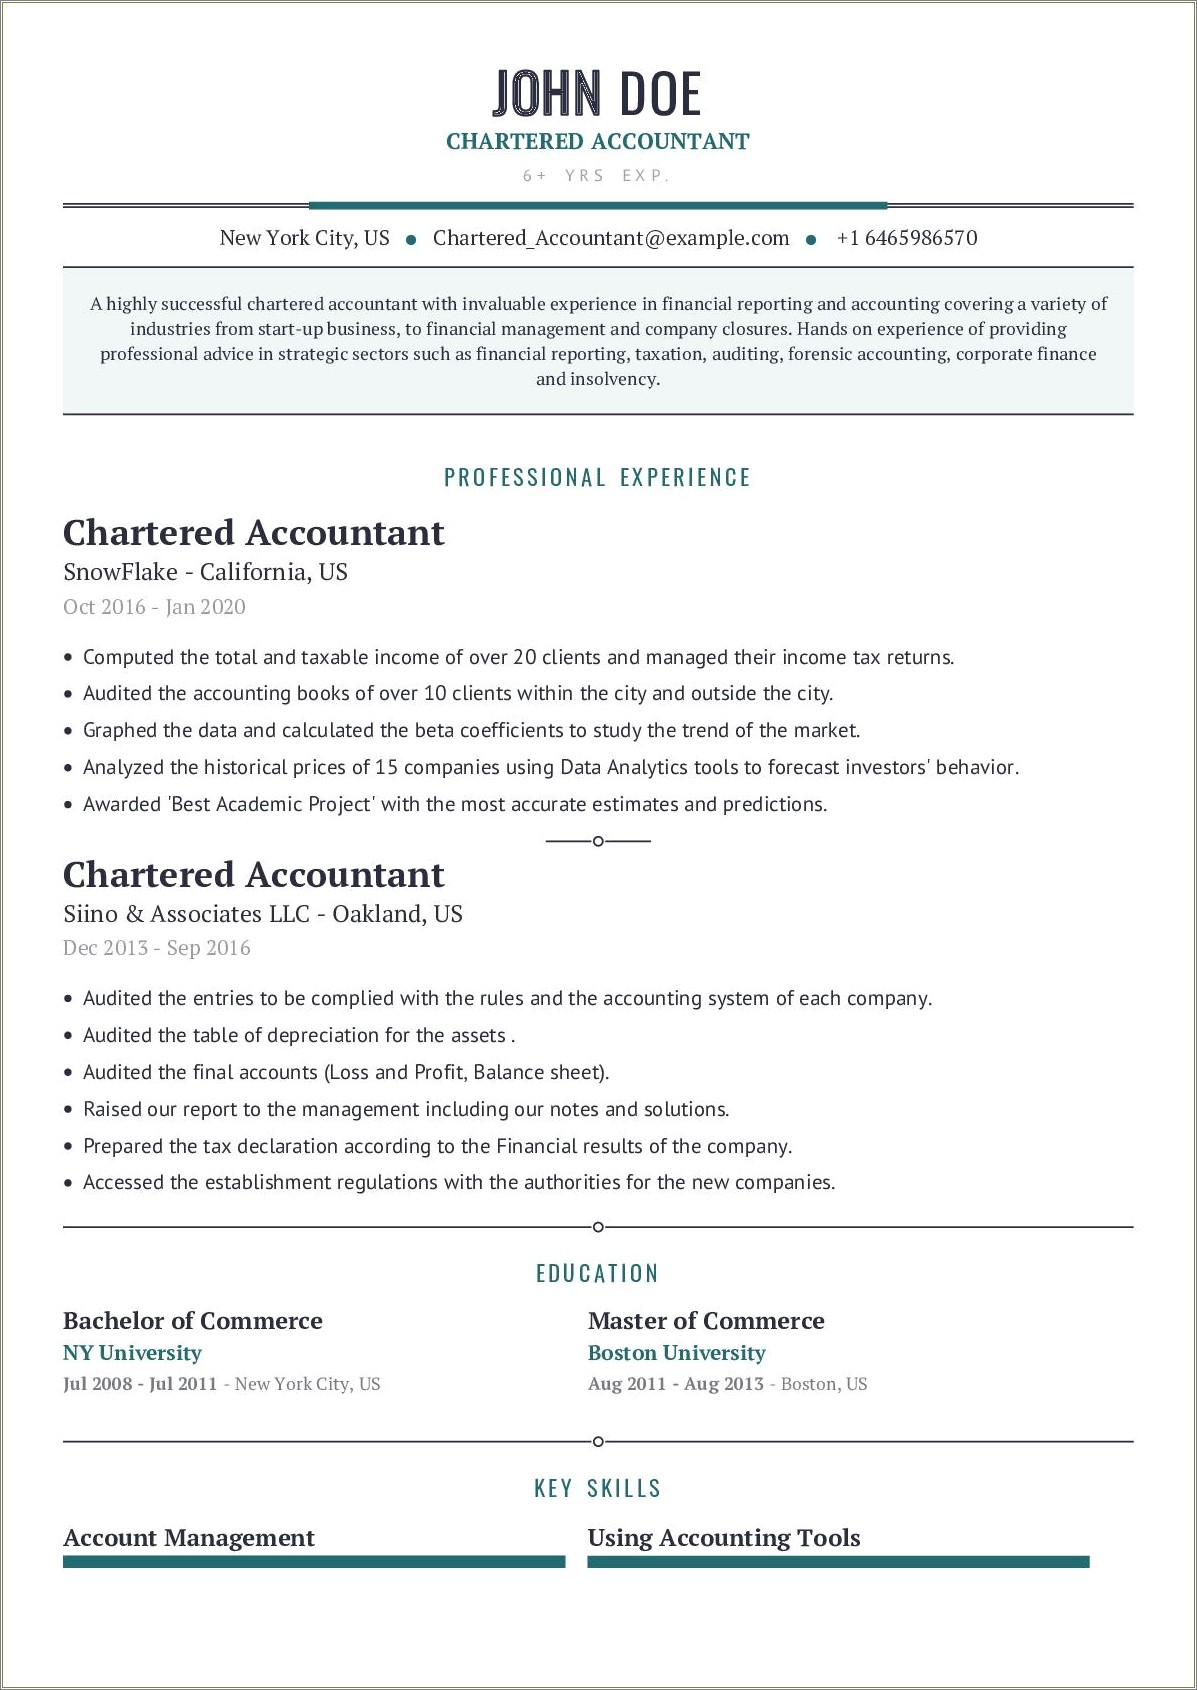 Project Based Resume Example For Accountant